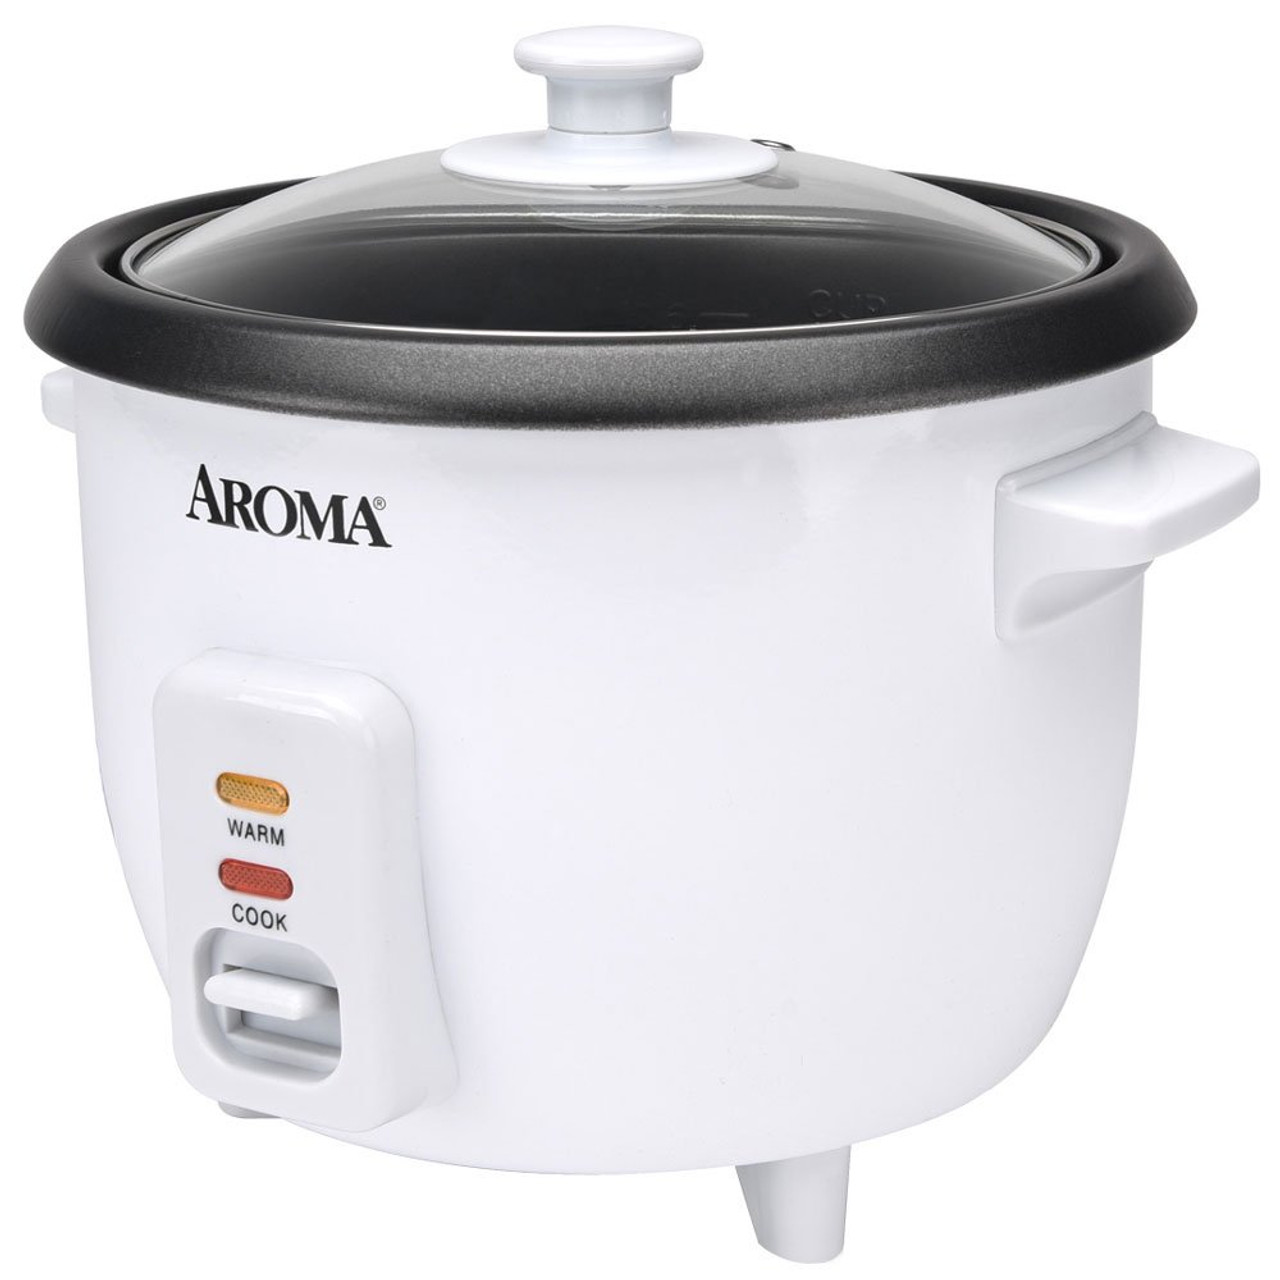 Aroma 6 cup Rice Cooker and Food Steamer Review 